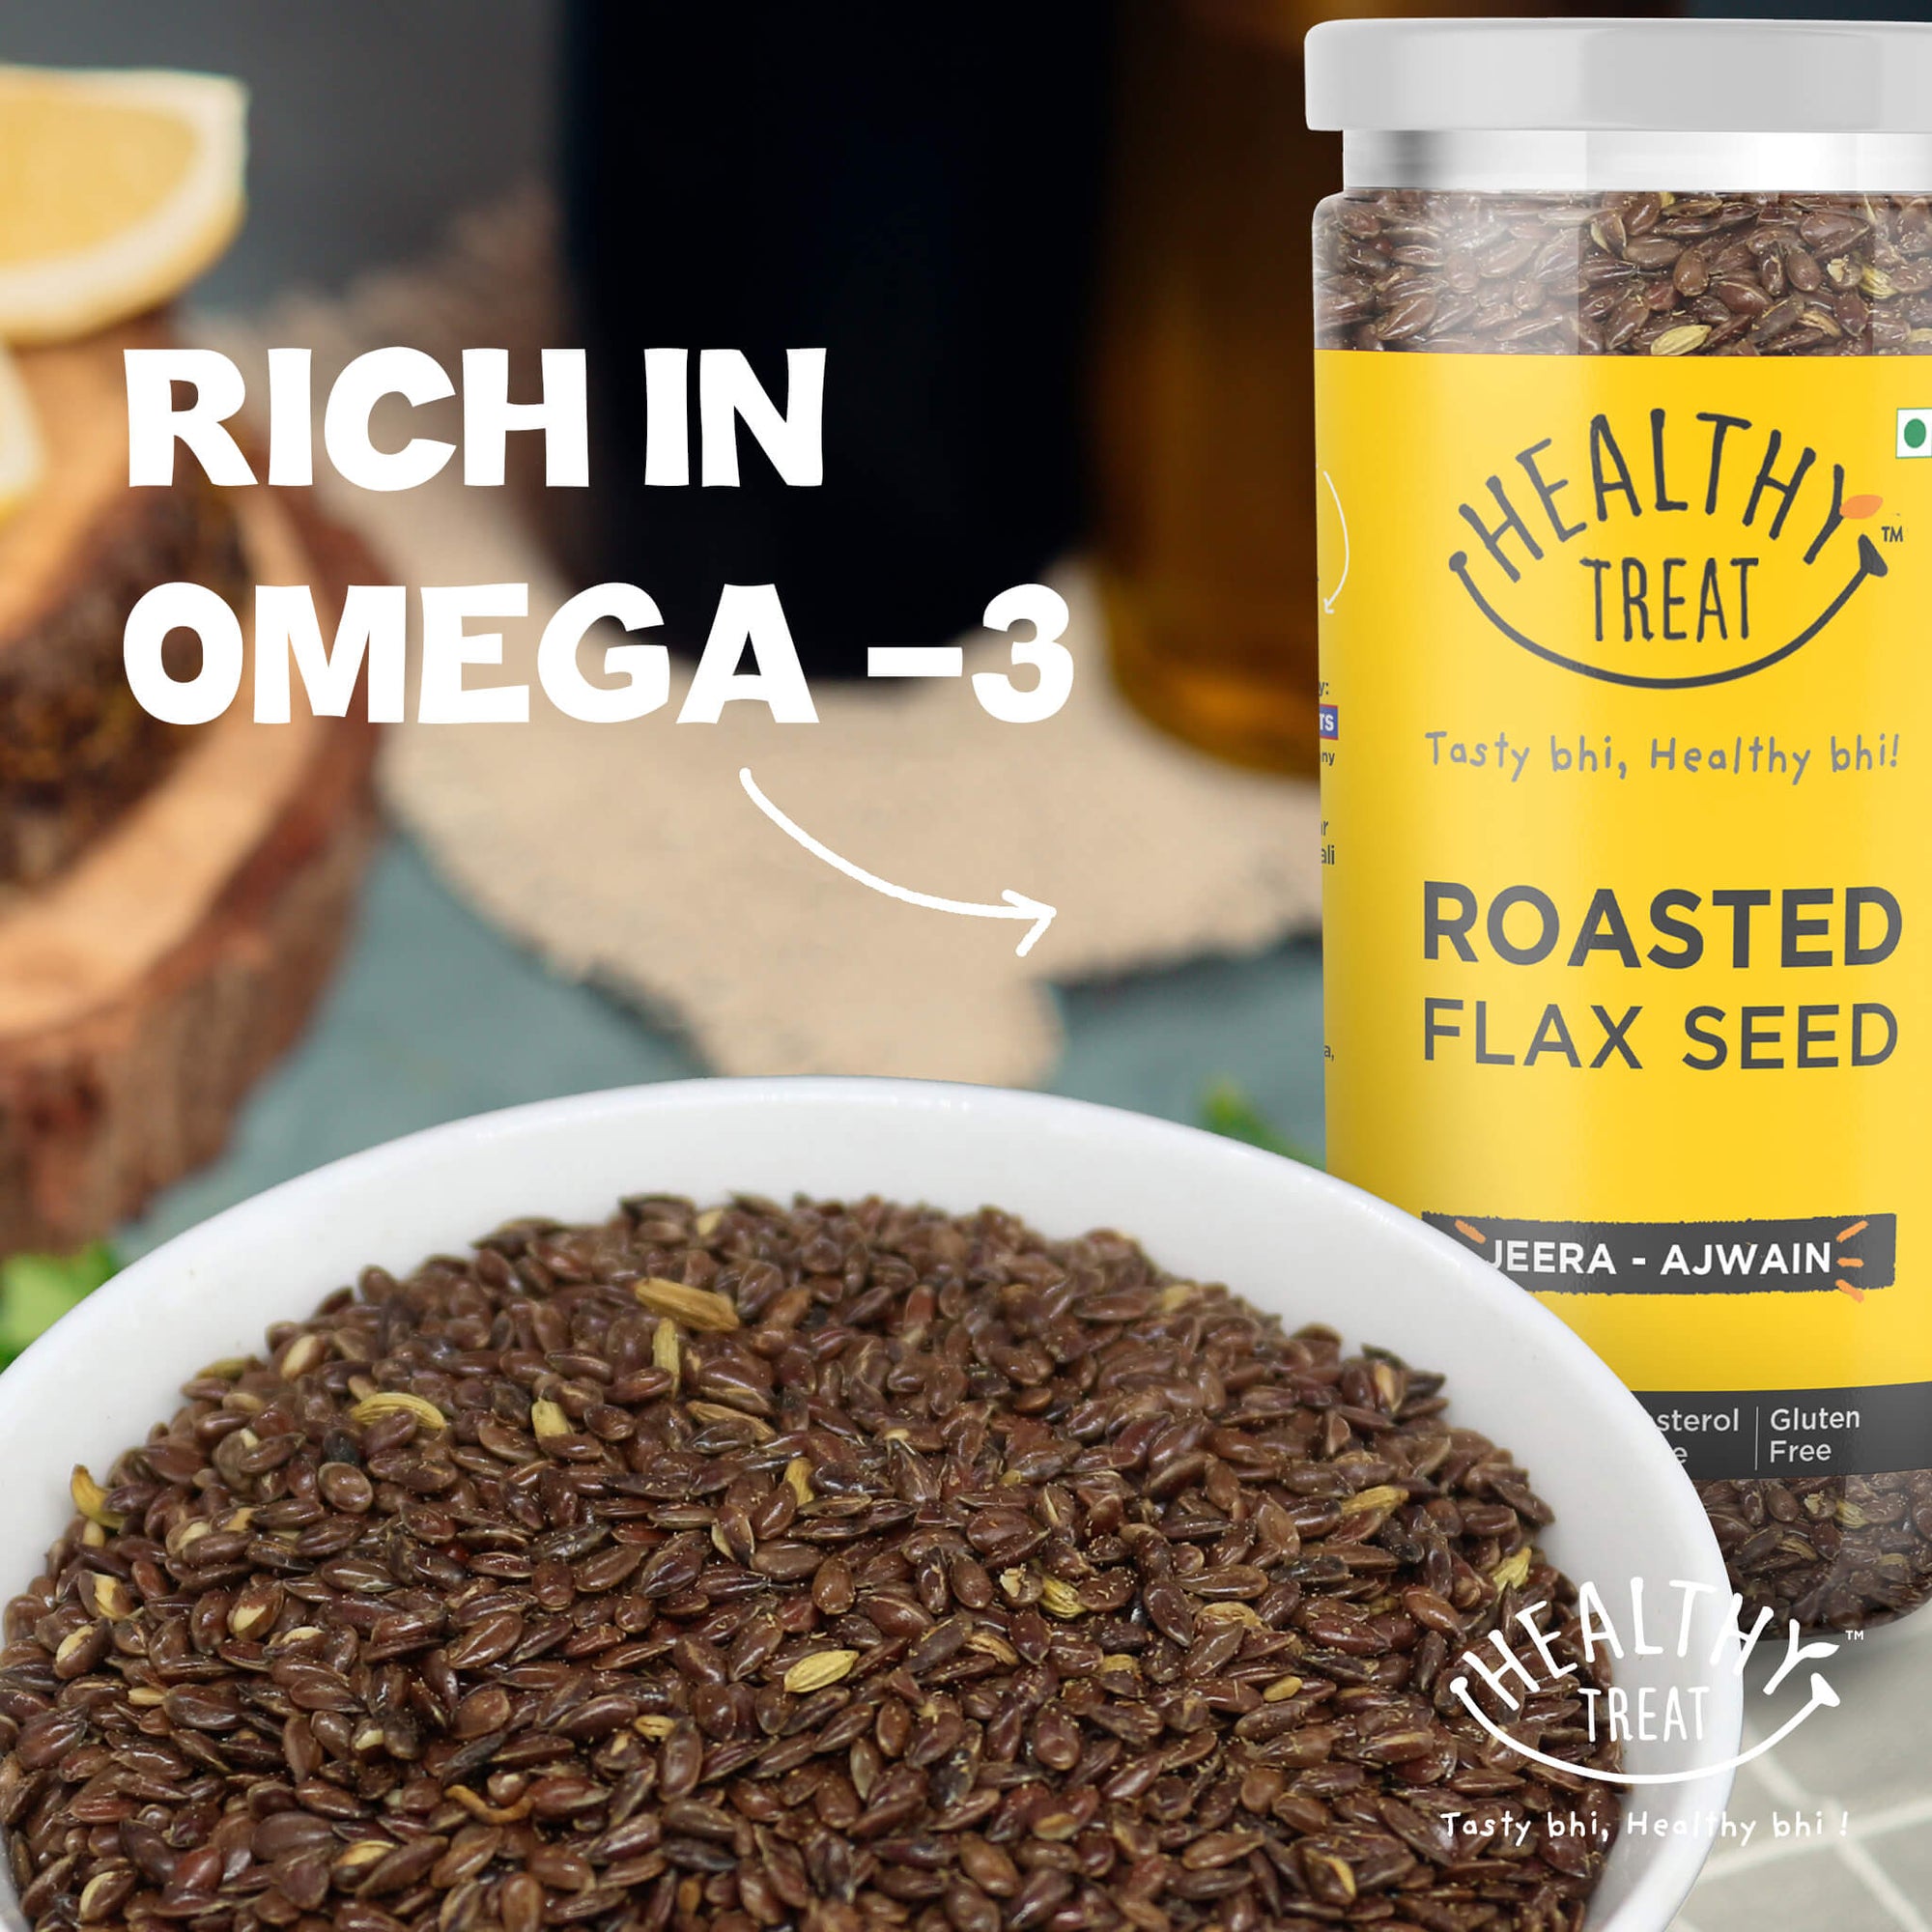 Crunchy Roasted Flax Seeds Jeera Ajwain, from Healthy Treat, for a delicious, nutritious snack, RICH IN OMEGA-3 